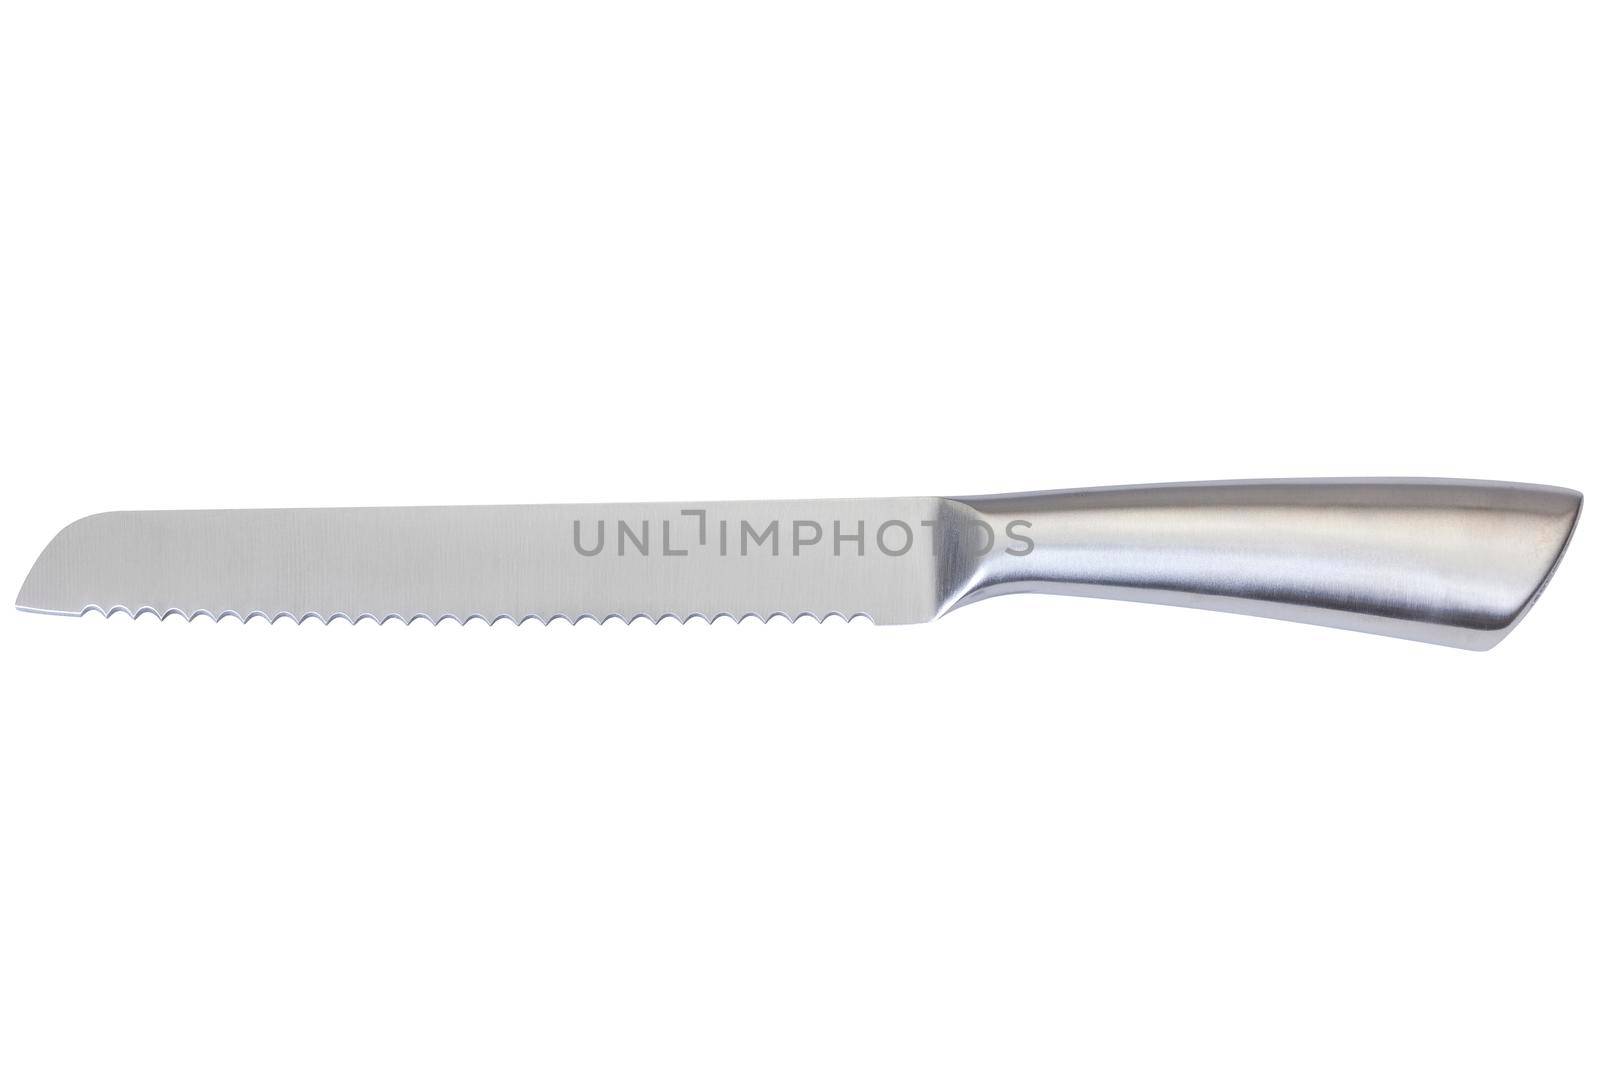 High-quality, high-durable stainless steel serrated bread knife, isolated on white with clipping path.